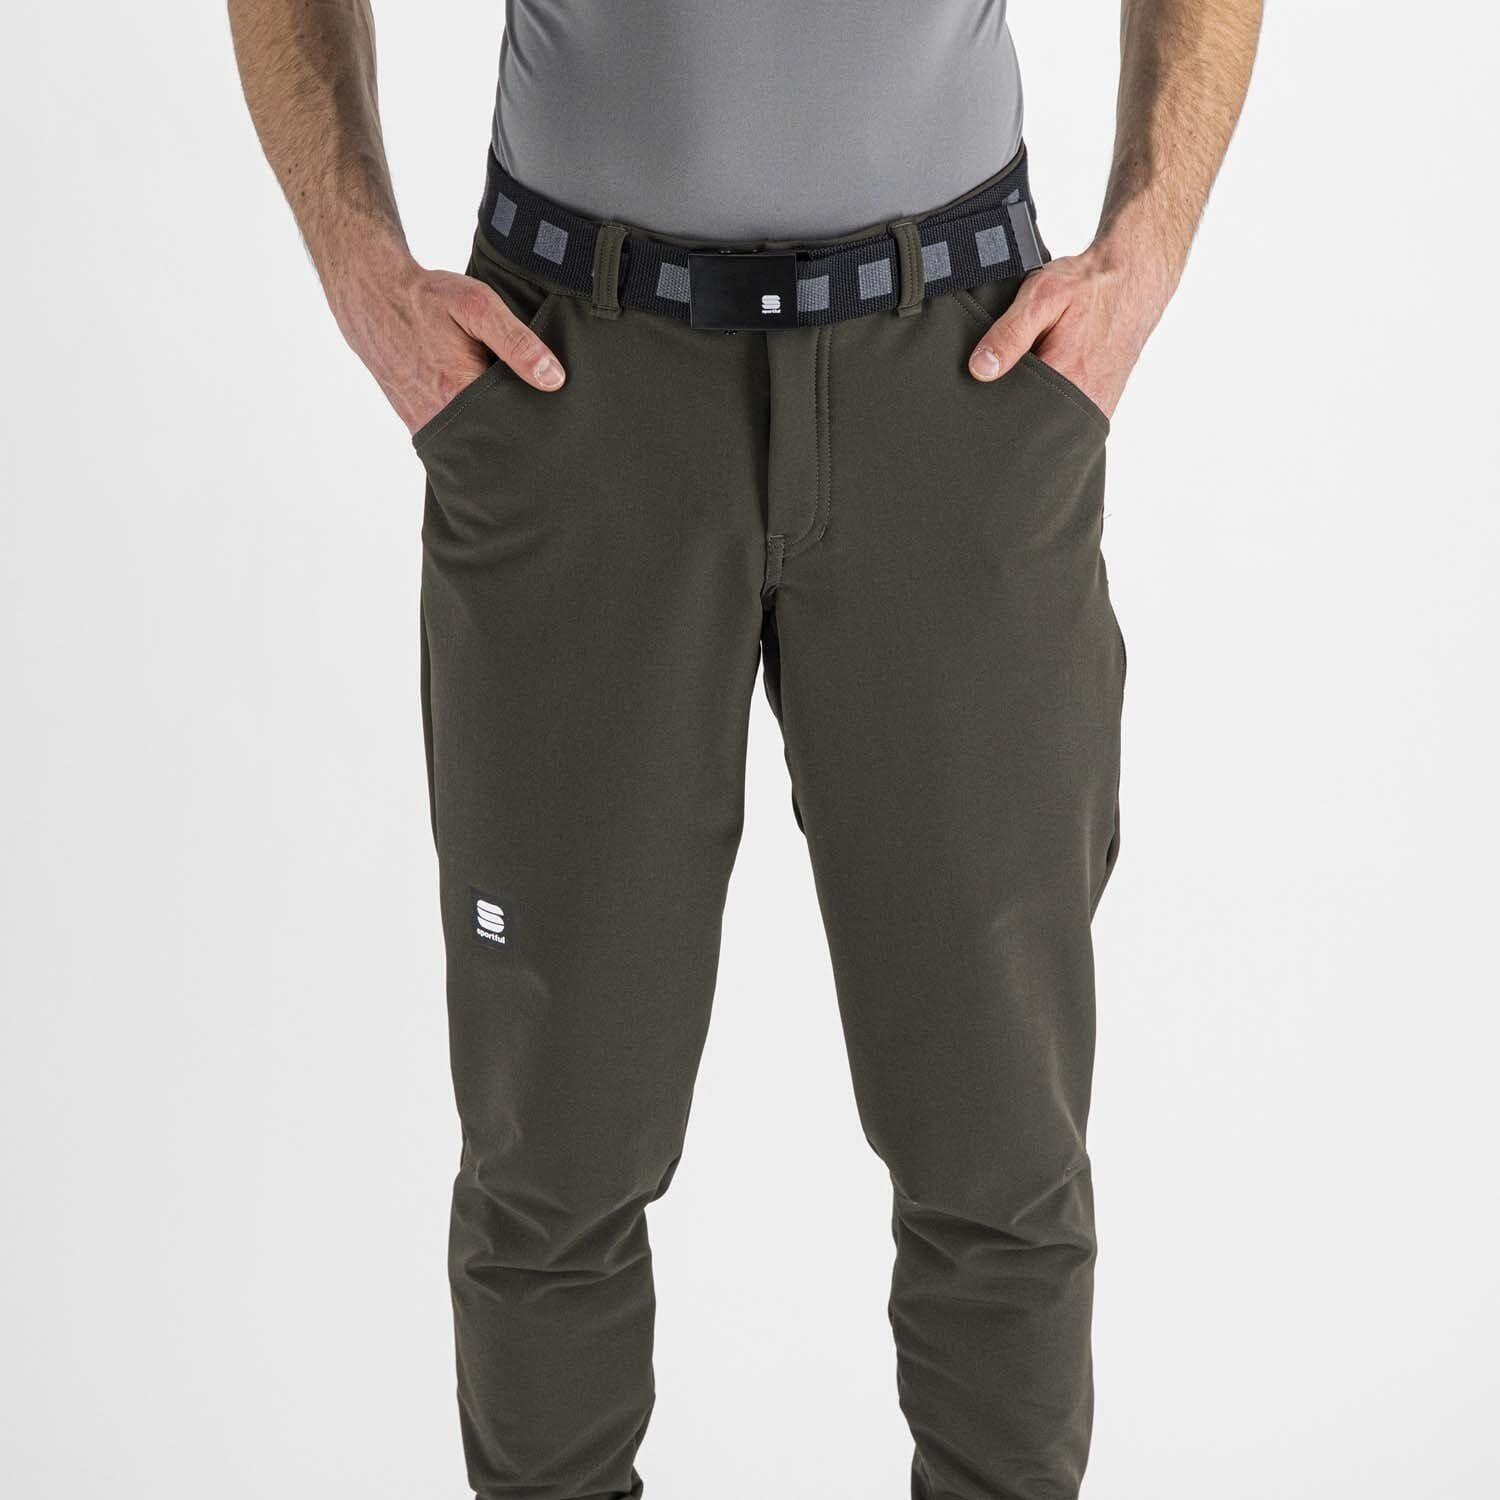 Karrimor Alpiniste Trousers Mens For Sale,Up To OFF 67%, 44% OFF